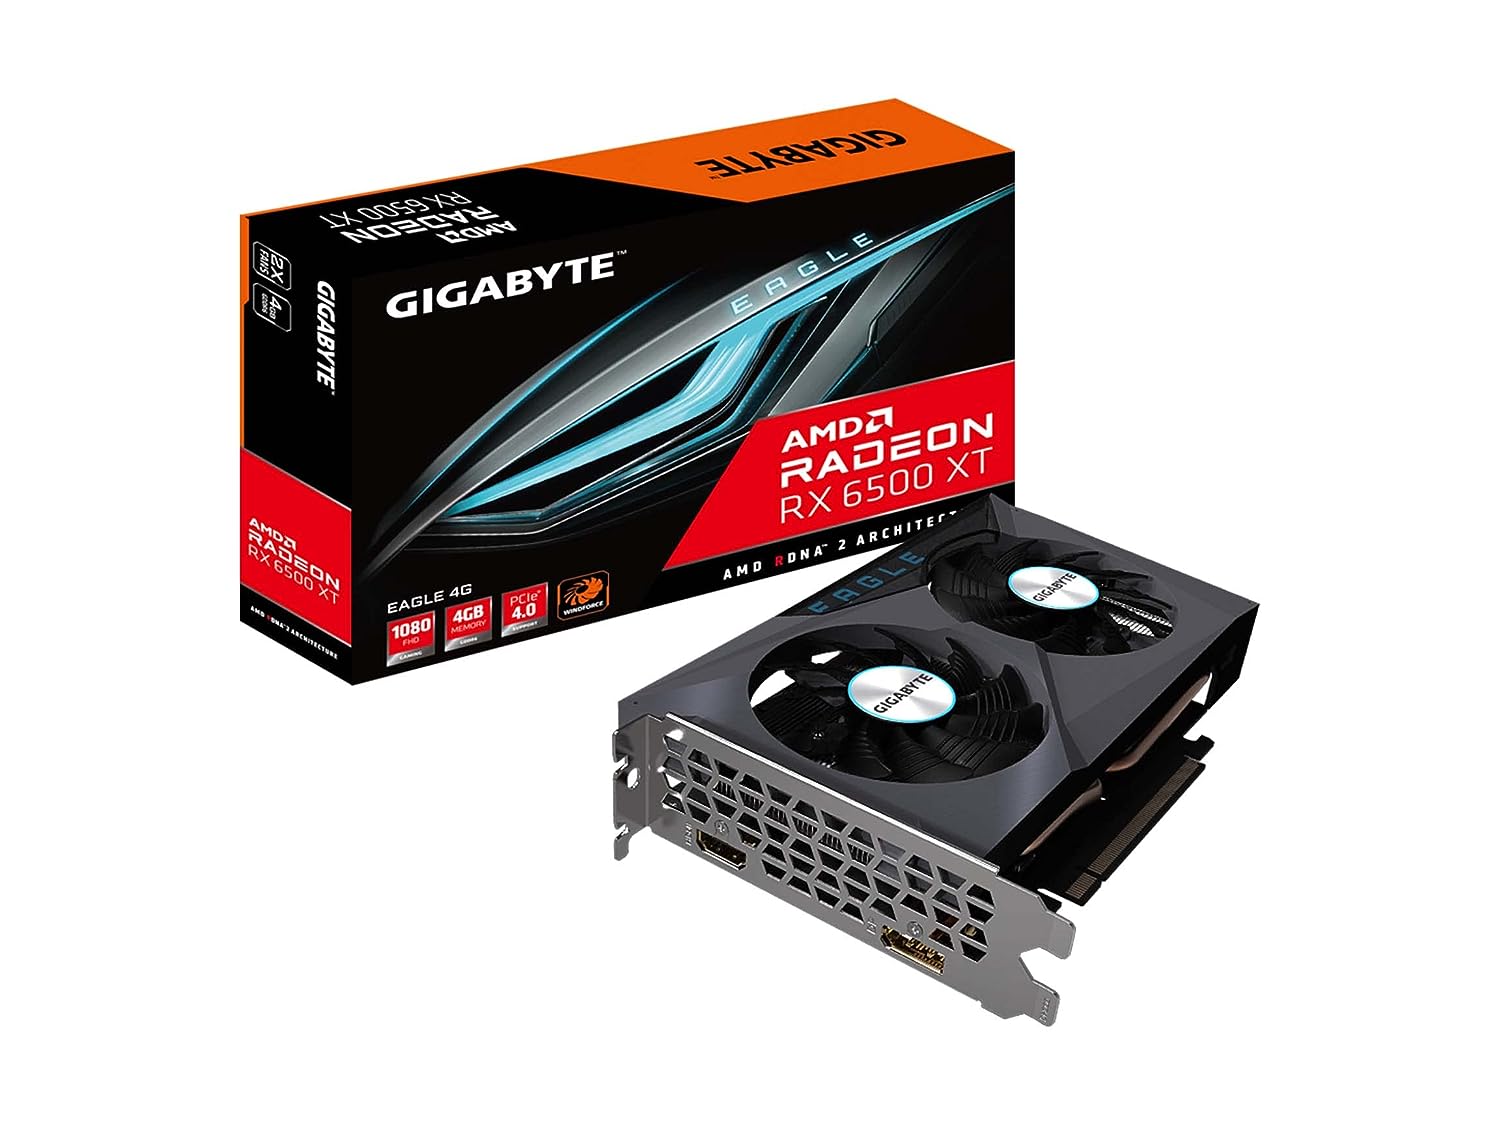 GIGABYTE GV-R65XTEAGLE-4GD, Radeon pci_e_x16 RX 6500 XT, Integrated with 4GB GDDR6 64-bit Memory Interface, WINDFORCE 2X Cooling System with Alternate Spinning Fans & Graphene Nano Lubricant